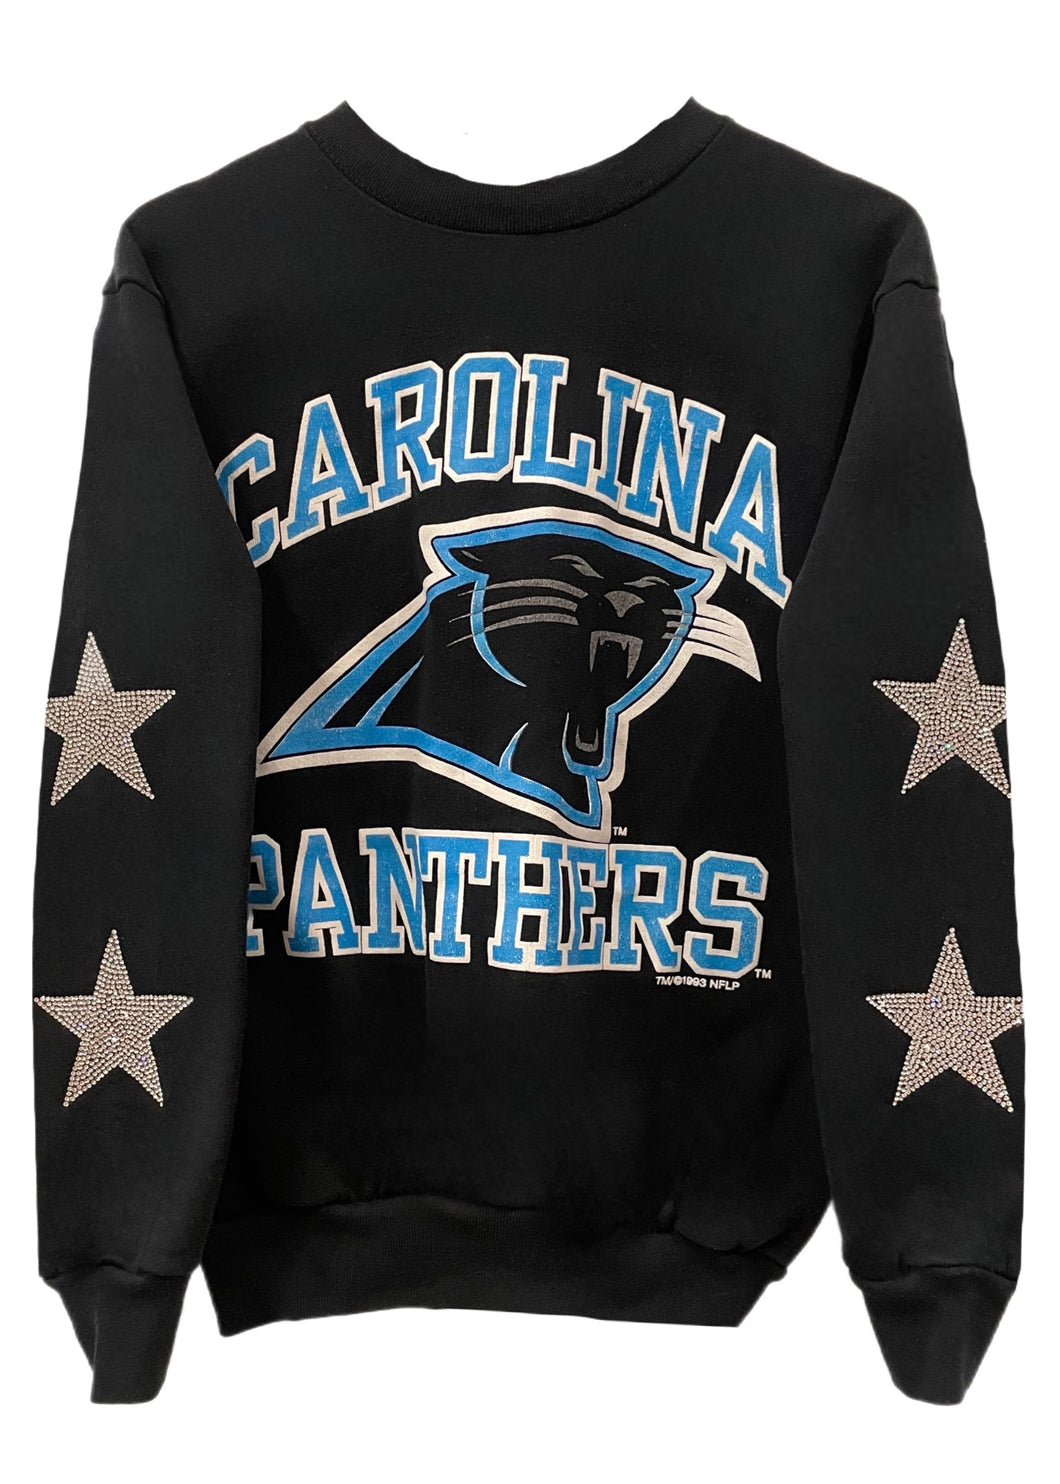 Carolina Panthers, Football One of a KIND Vintage Sweatshirt with Crystal Star Design